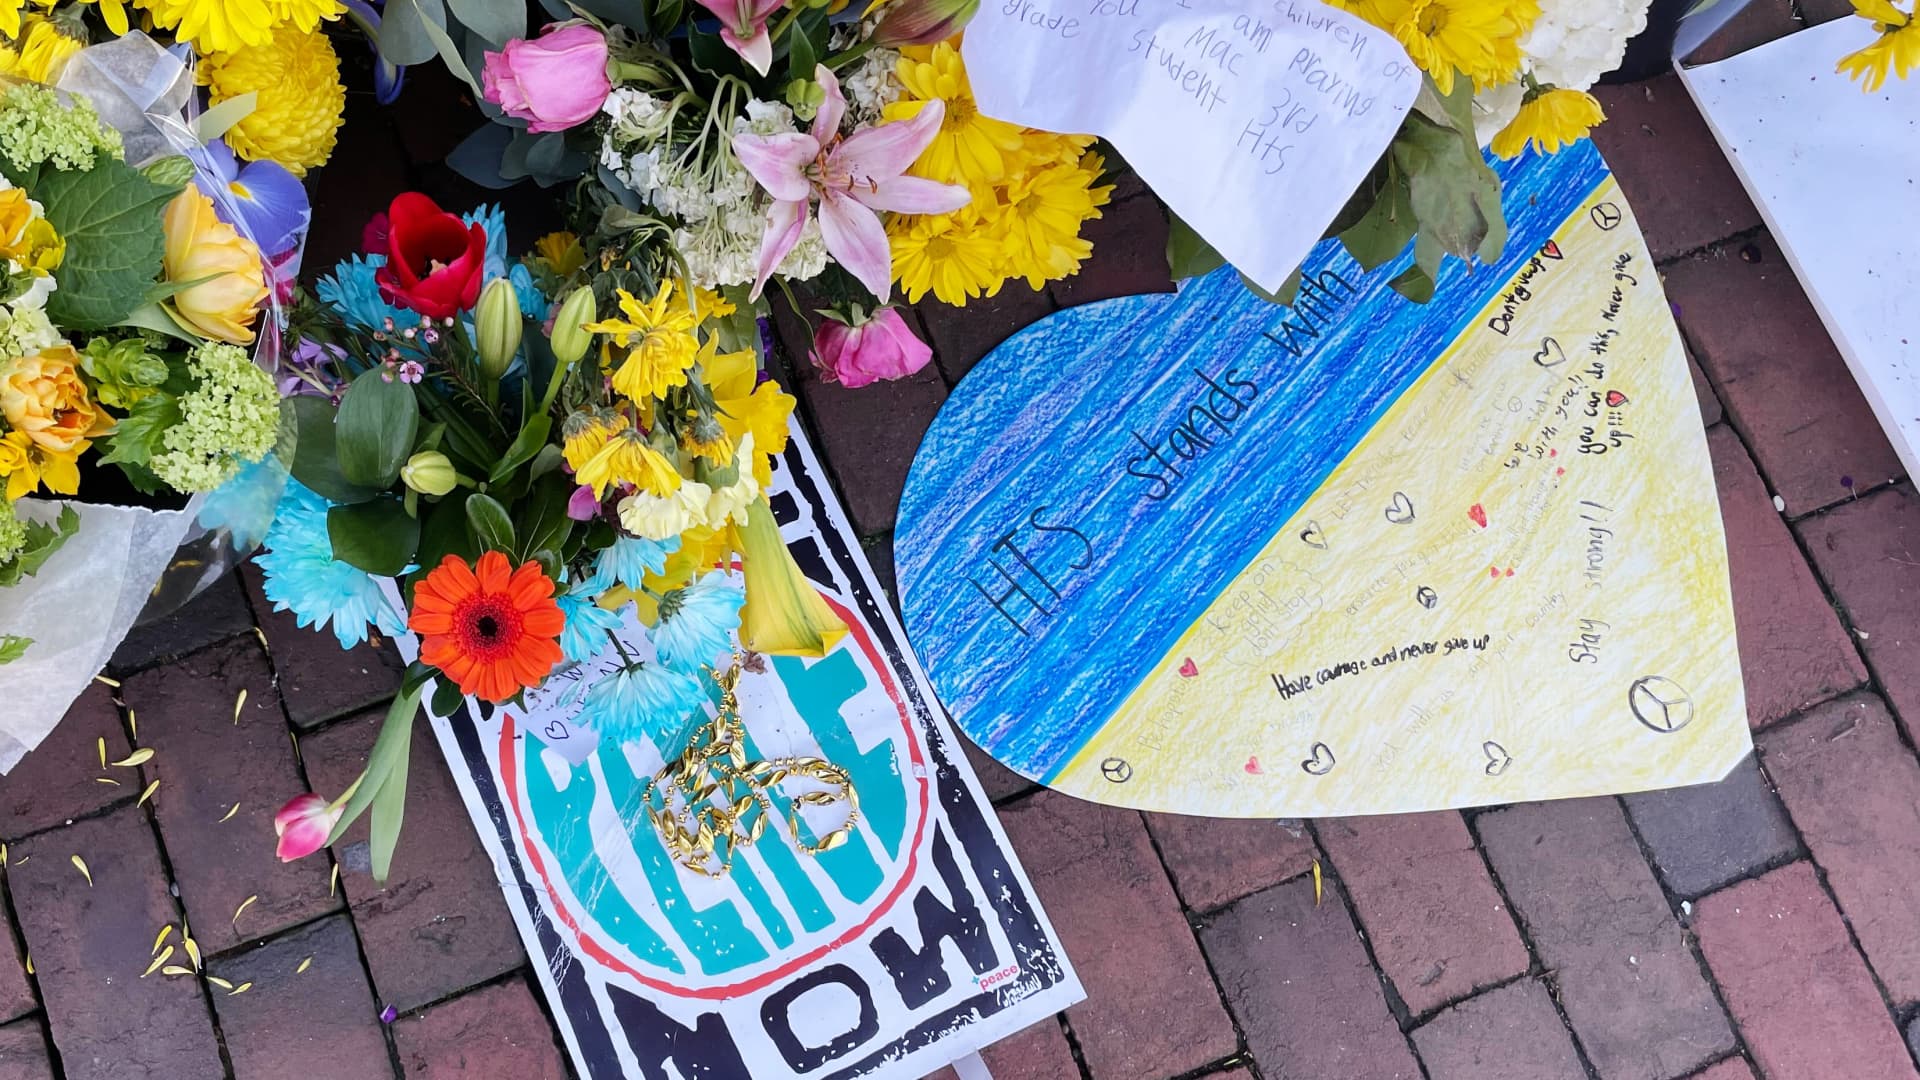 Notes and flowers are left outside the Ukraine Embassy in Washington D.C.